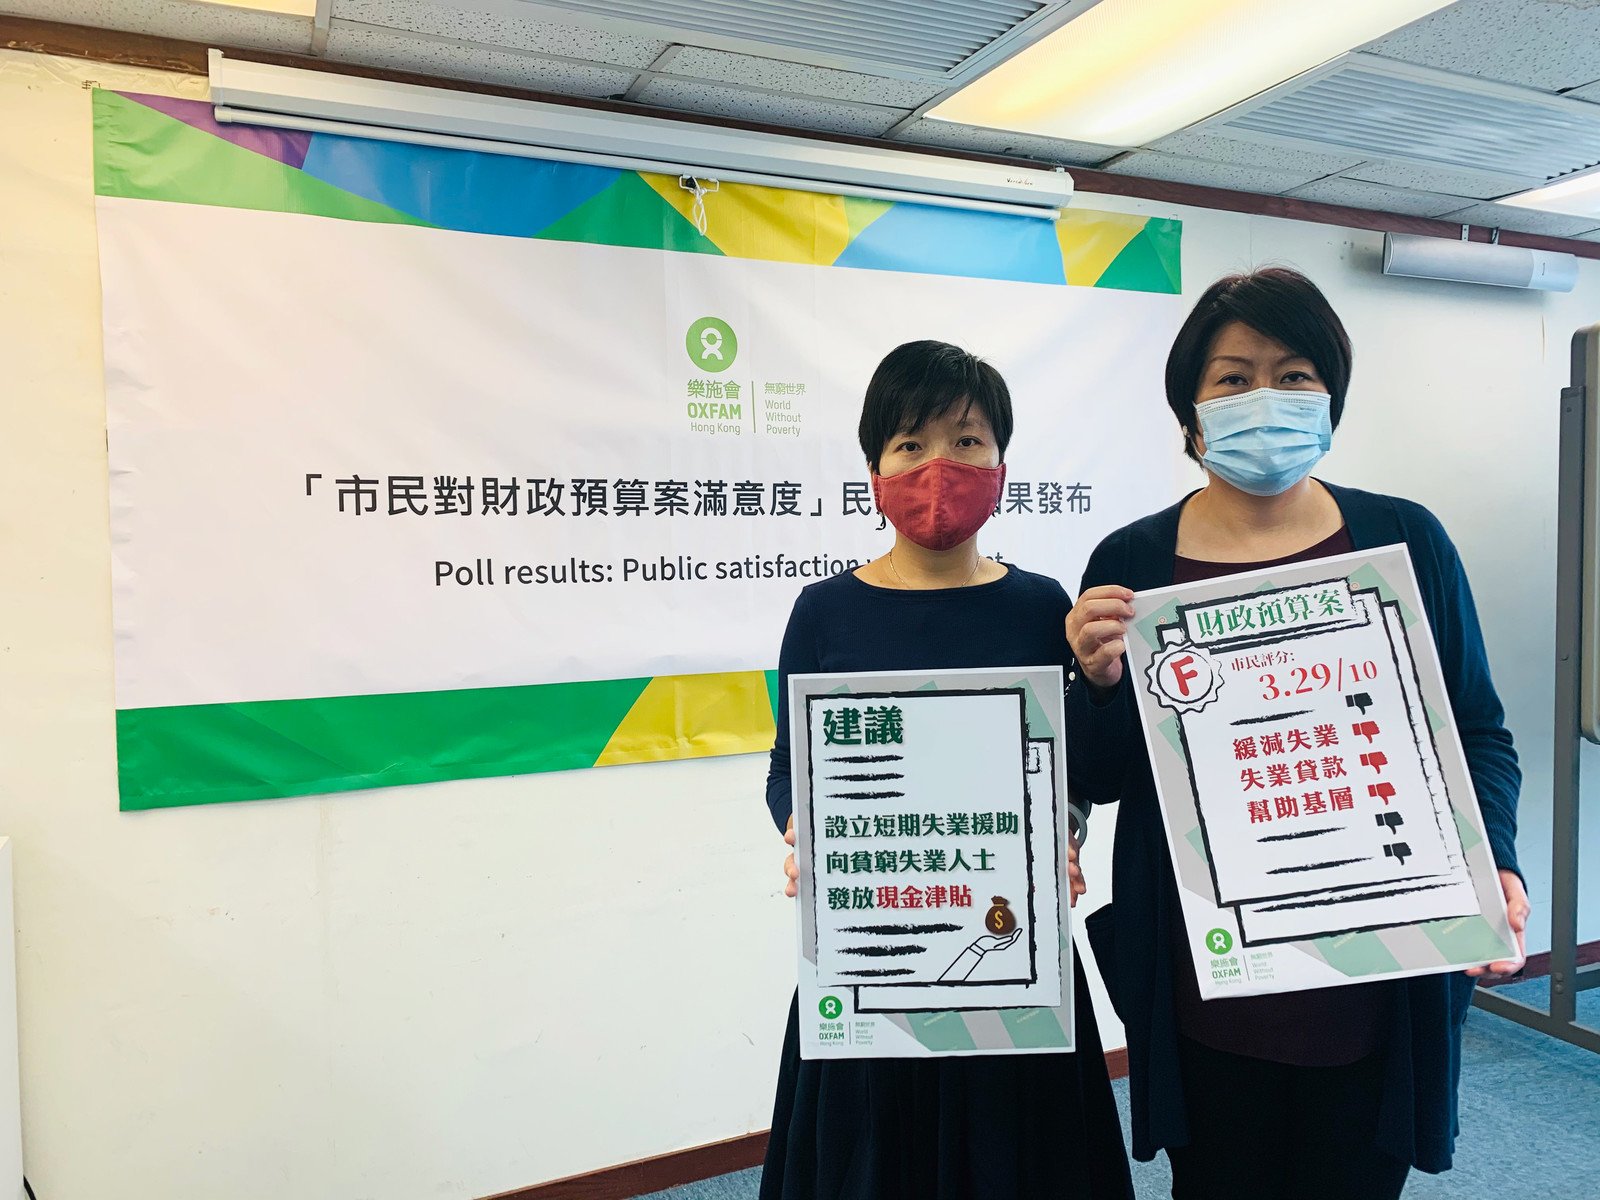 Ms. Kalina Tsang, Director General (right), and Ms. Wong Shek Hung, Acting Director of Hong Kong, Macau, Taiwan Programme (left), announced findings from Oxfam's latest public survey about the government’s 2021 budget, where the public gave a failing grade of 3.29 out of 10.